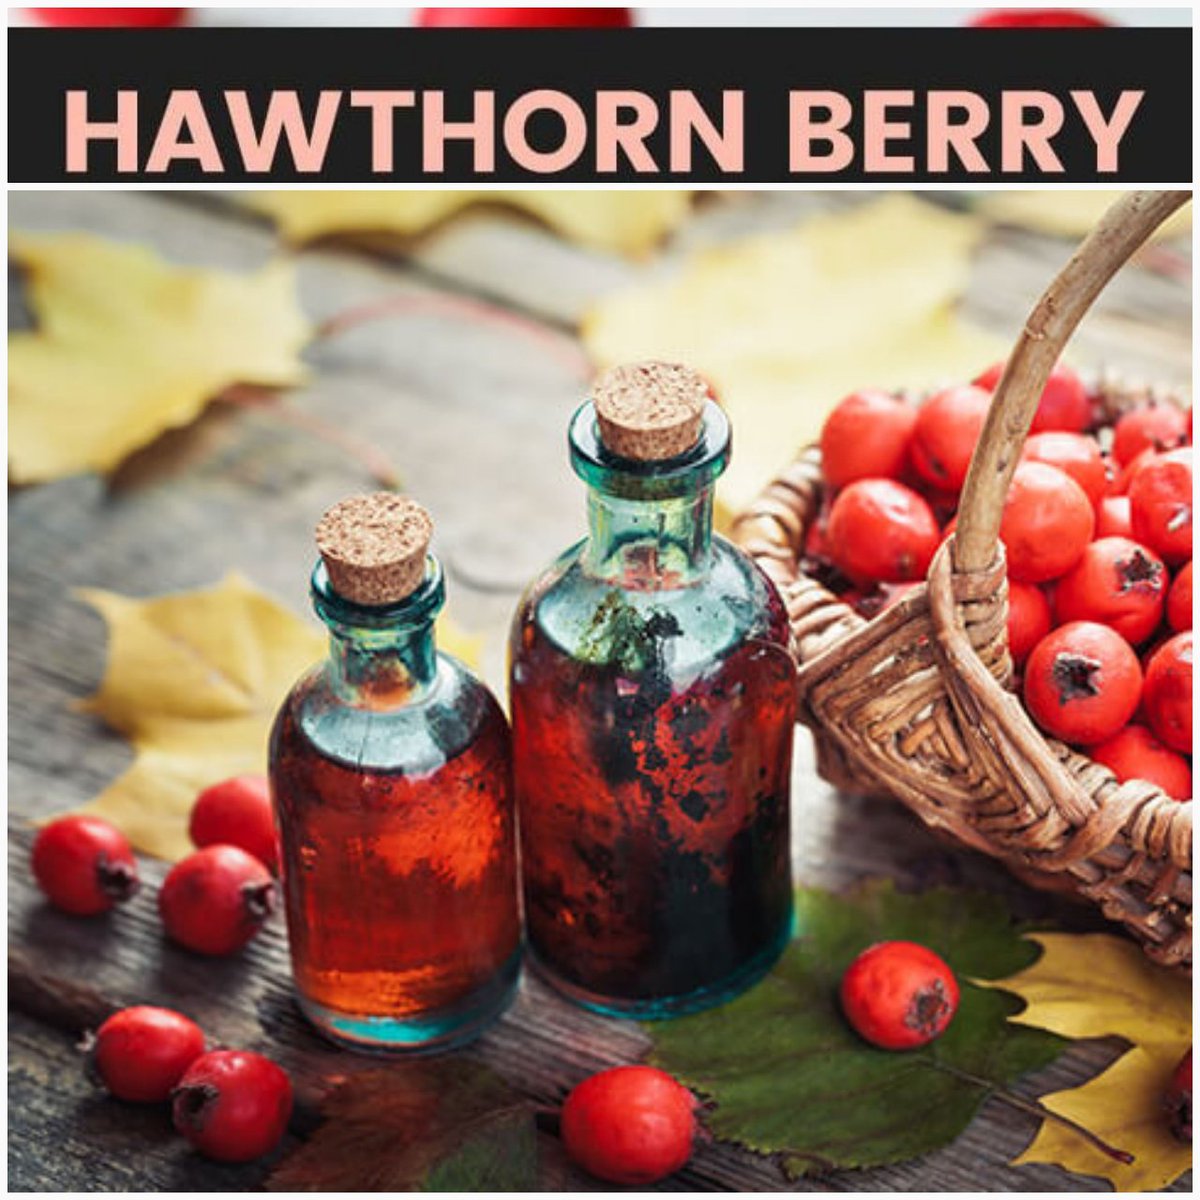 Hawthorne for #hearthealth for circulation for opening up the arteries of the #Heart #Hawthorne to help prevent heart issues to #preventheartattacks
#natural #nodrugs